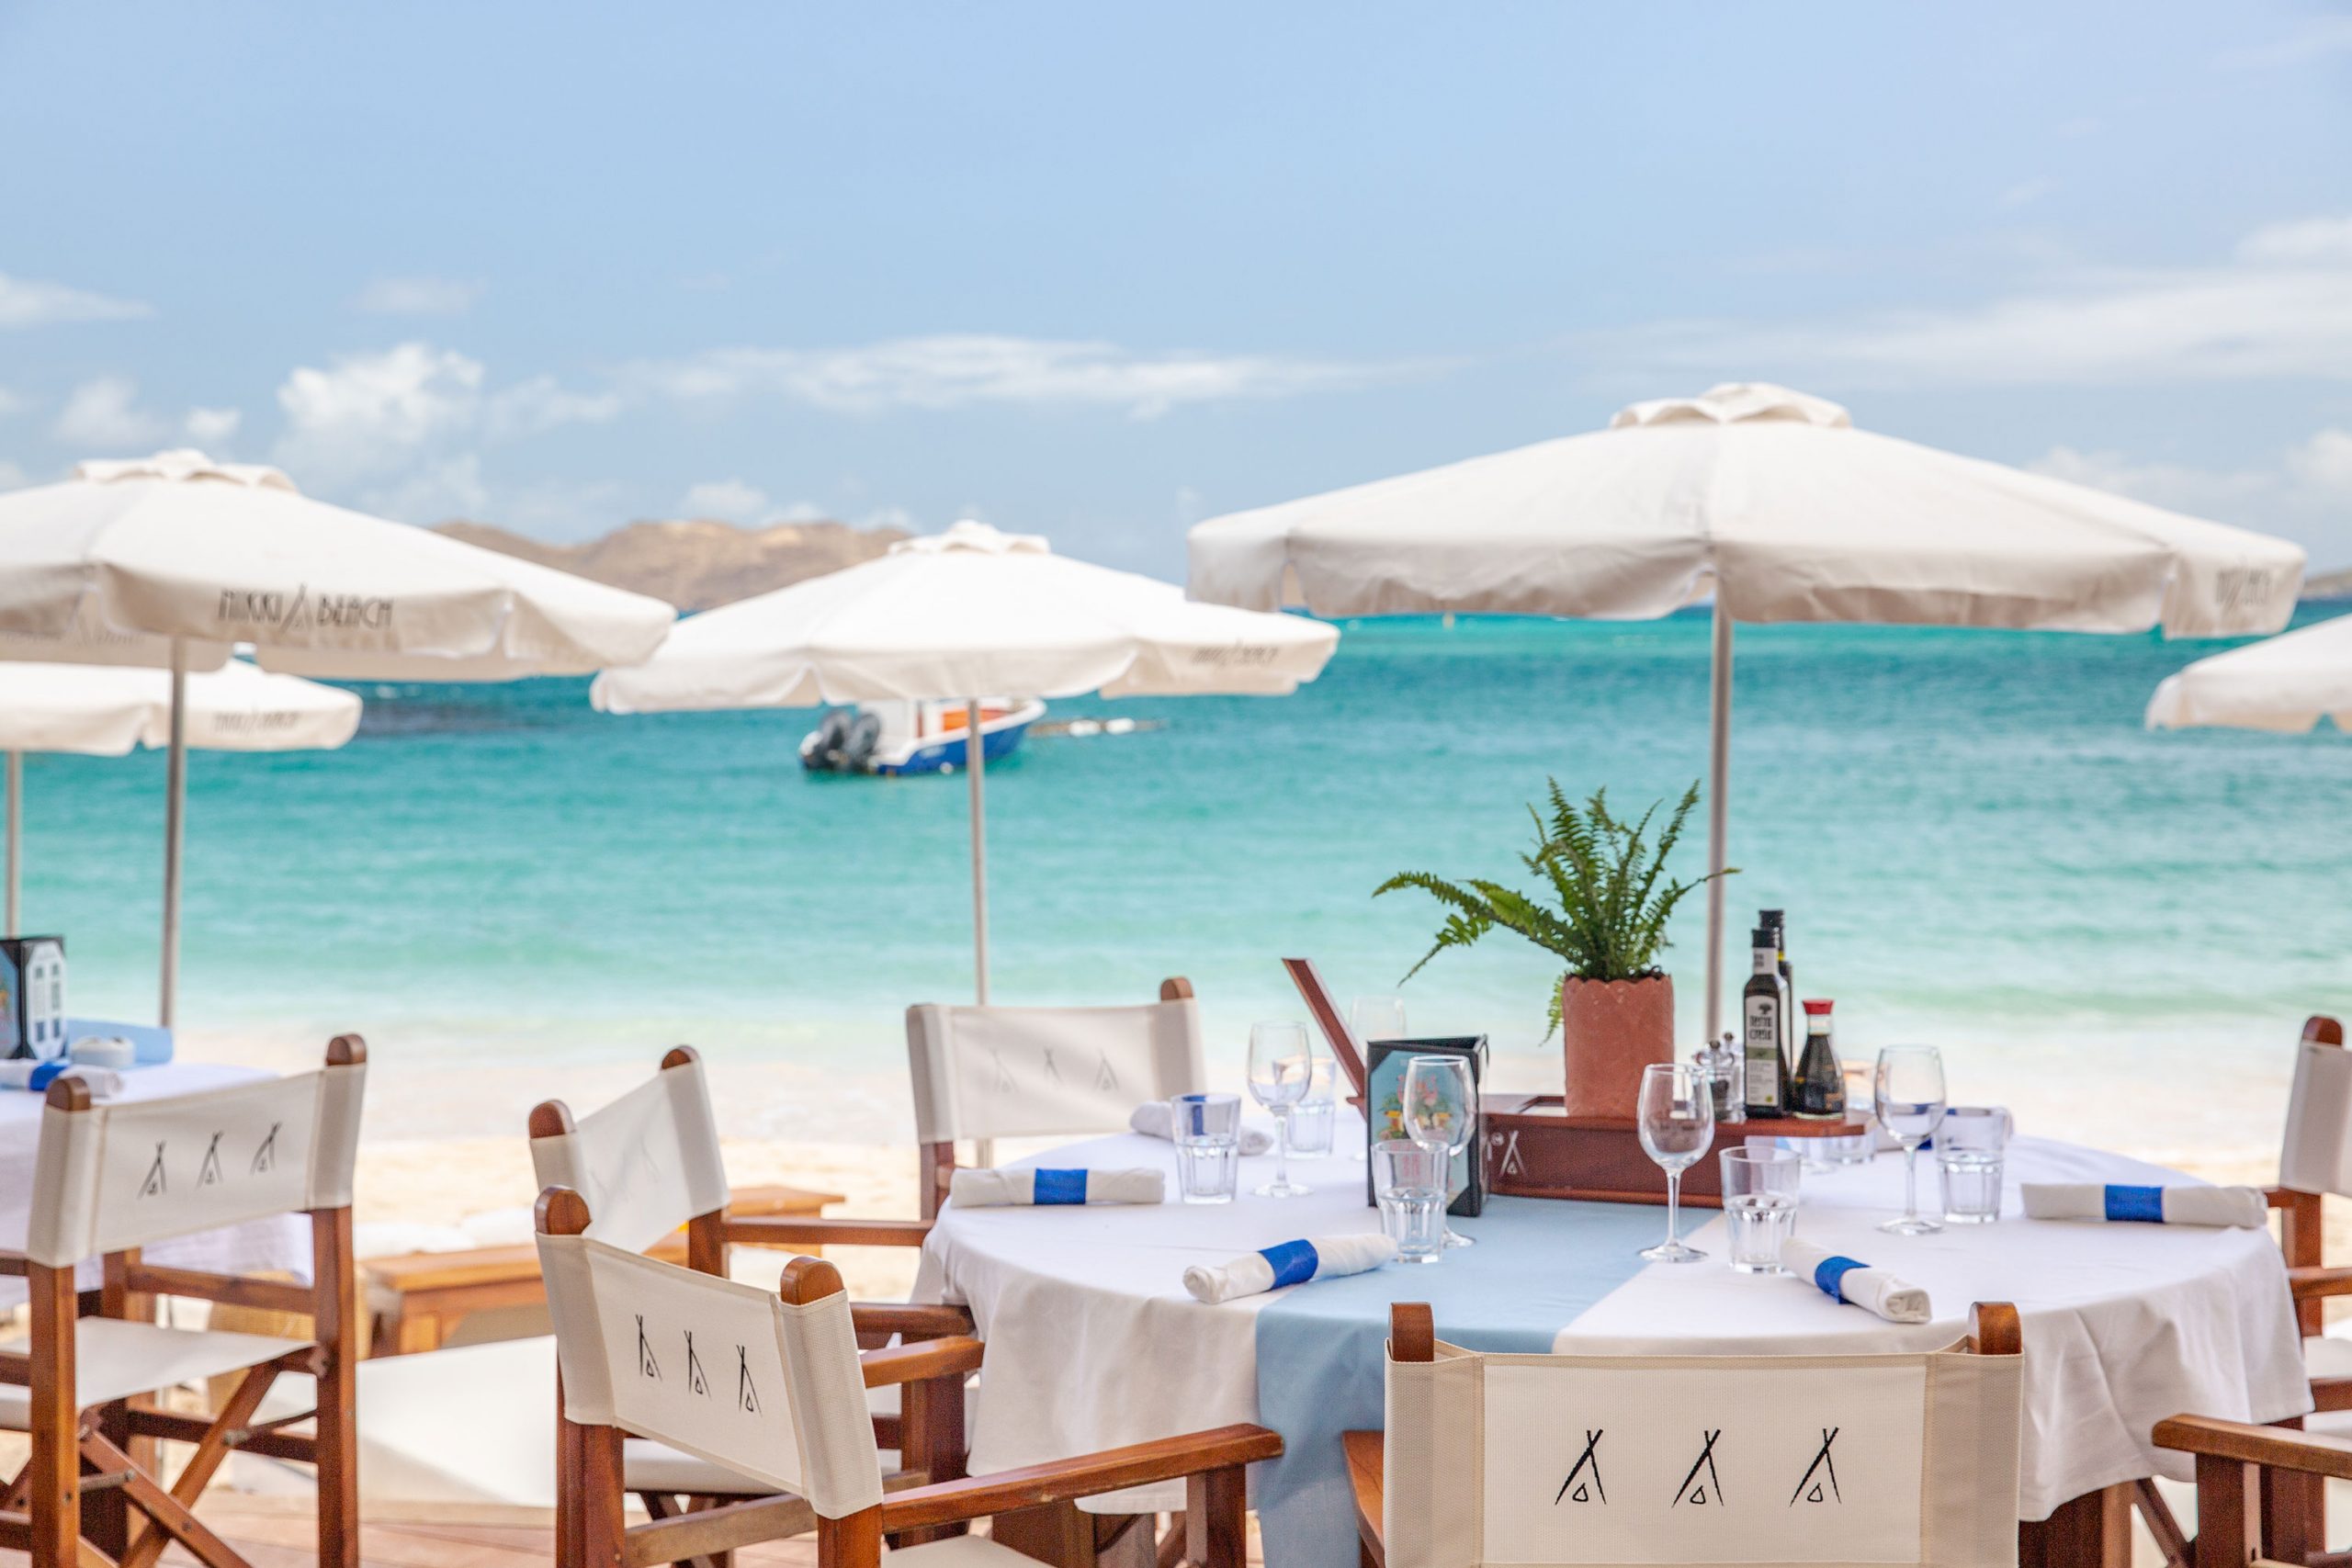 Where to Eat, Drink & Carouse in St. Barts – A place to drink